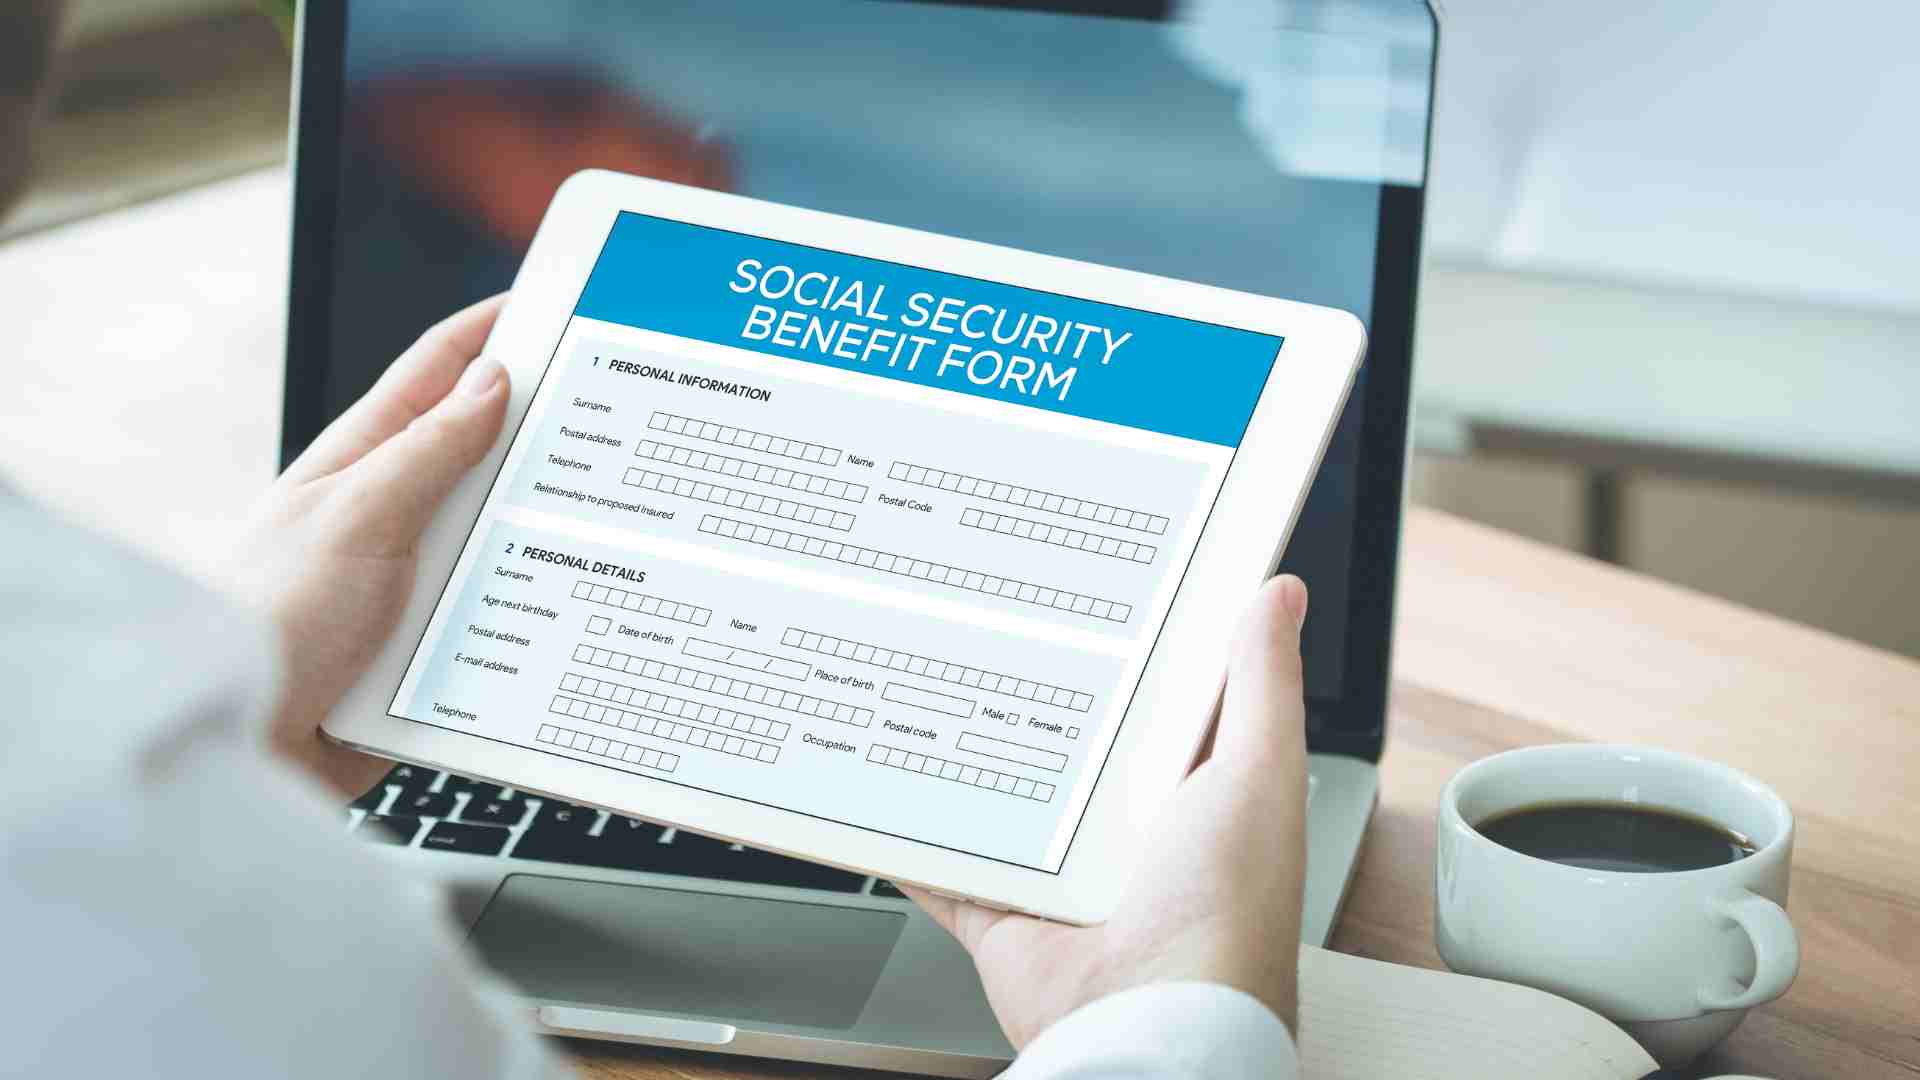 If you are 62 years old, you can apply for Social Security retirement benefits